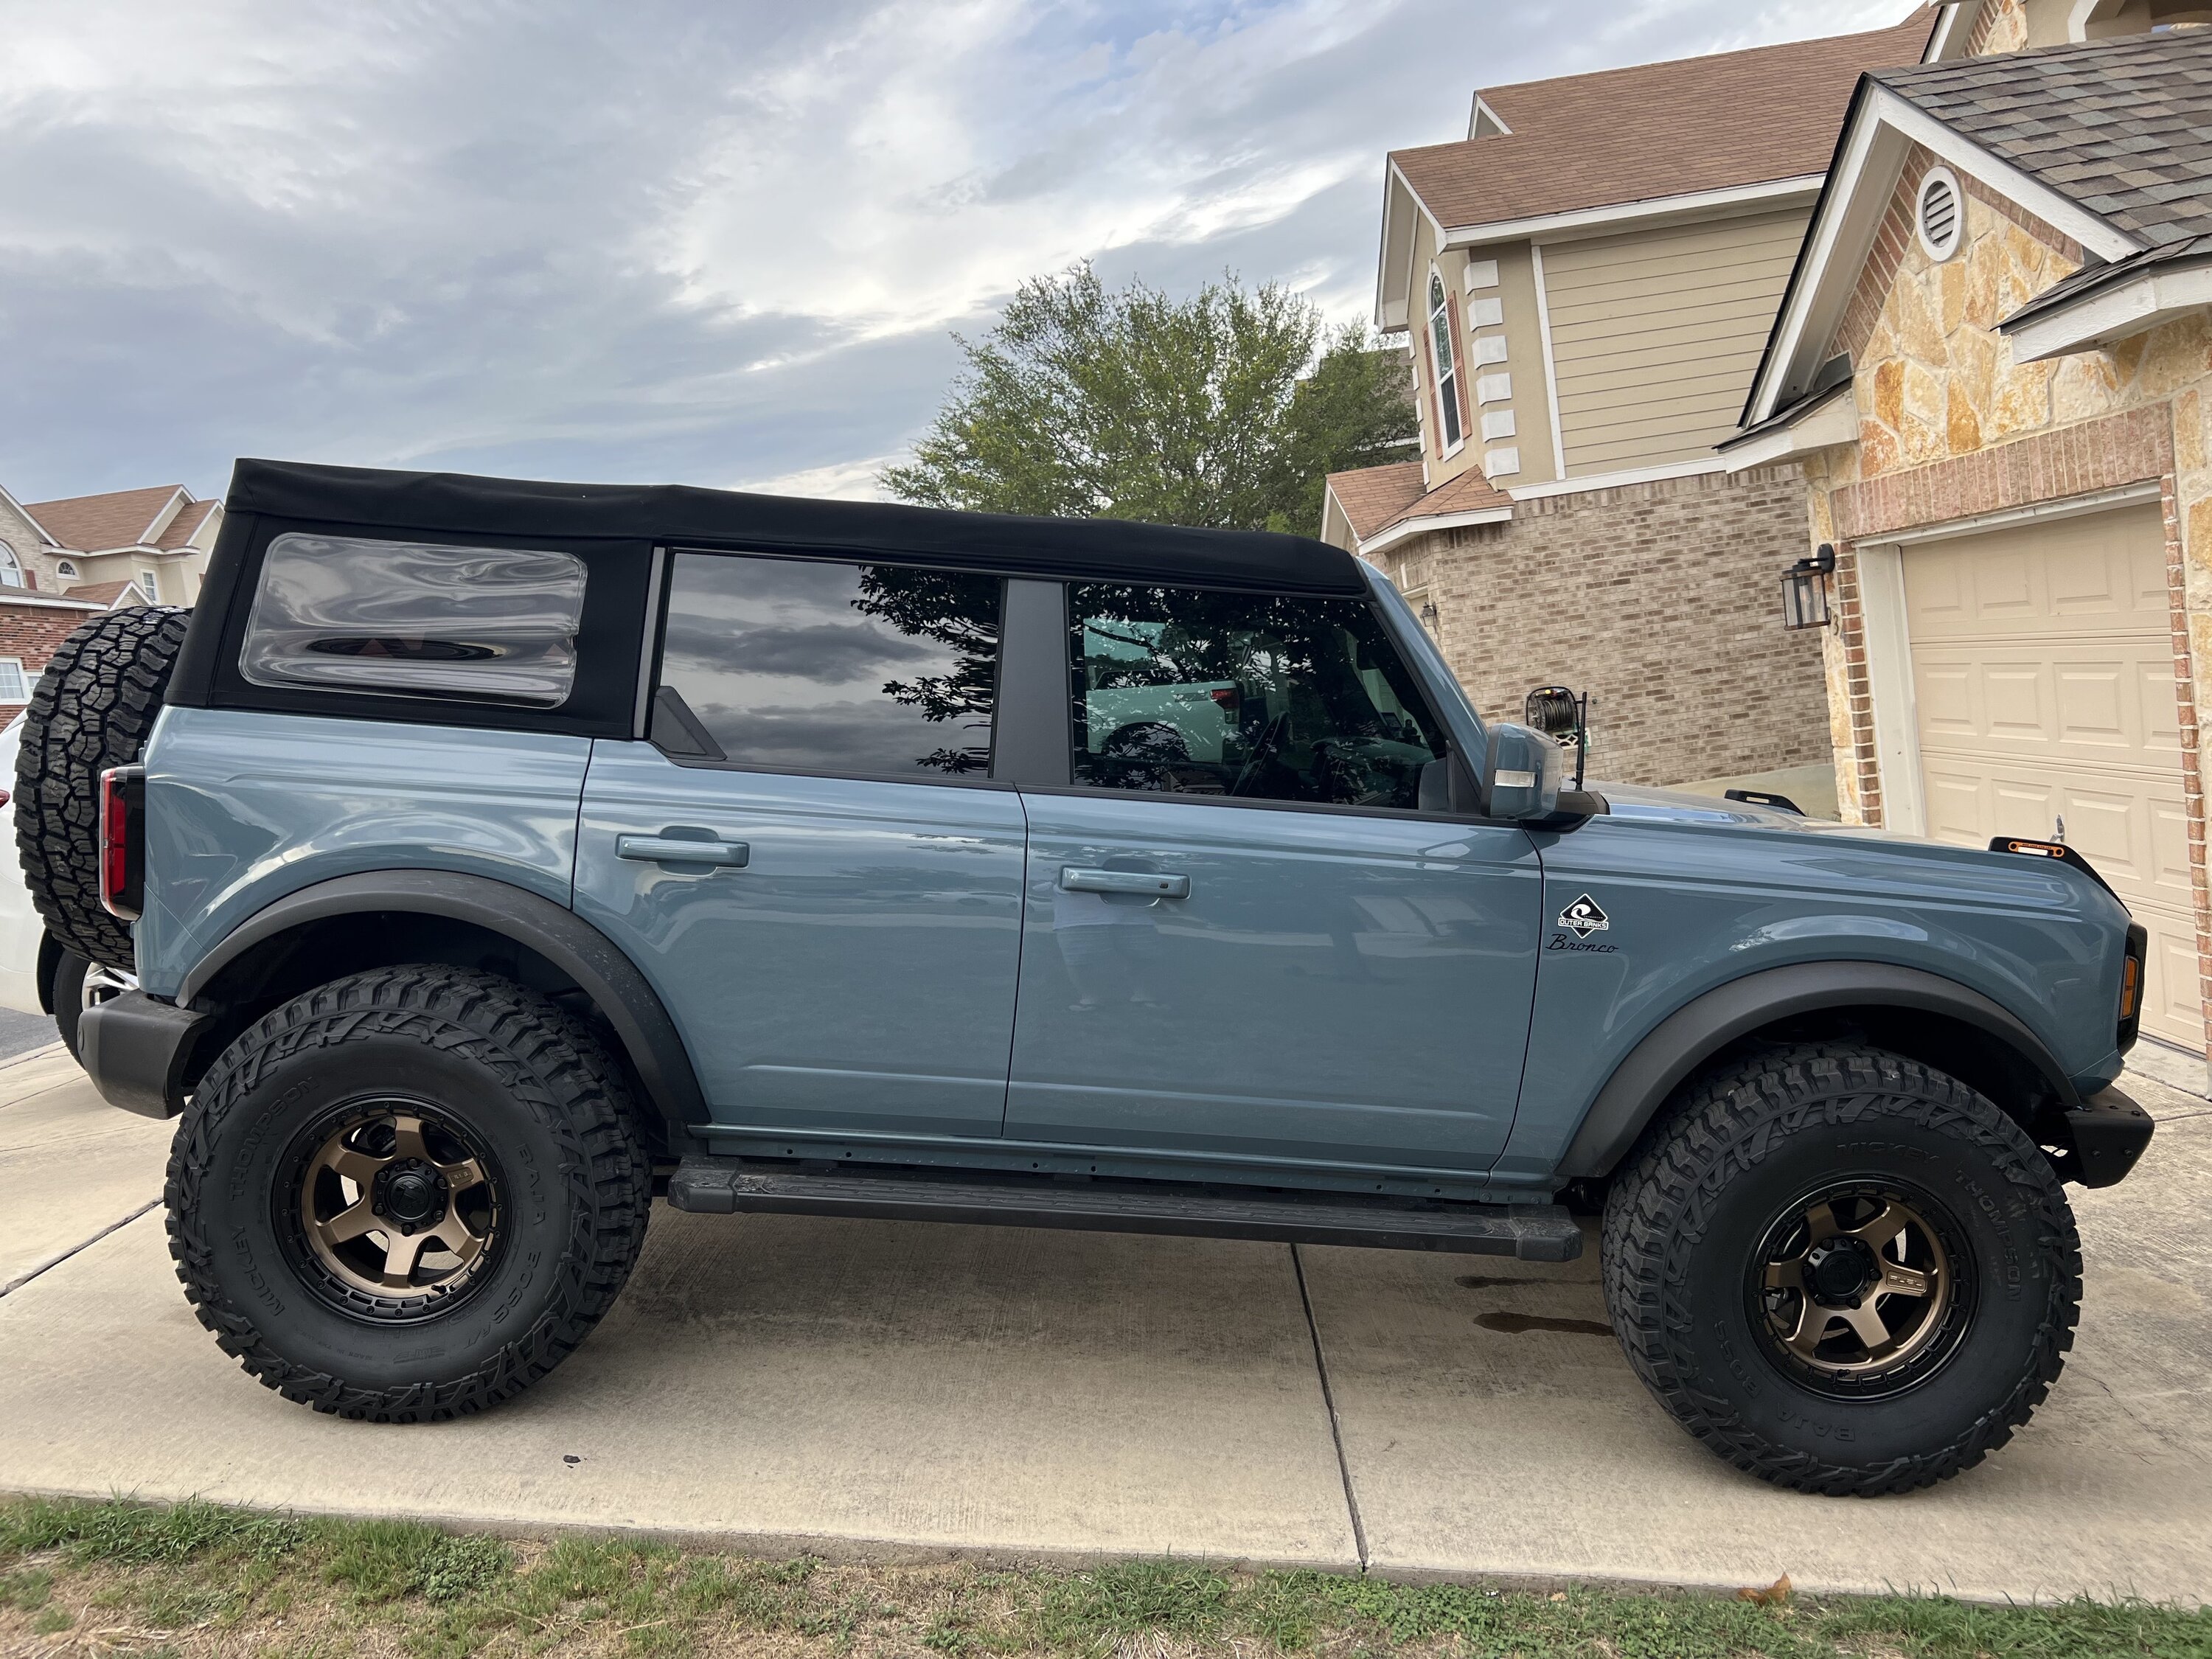 Ford Bronco Minimum lift for 37’s? 2022OBXAfterLift